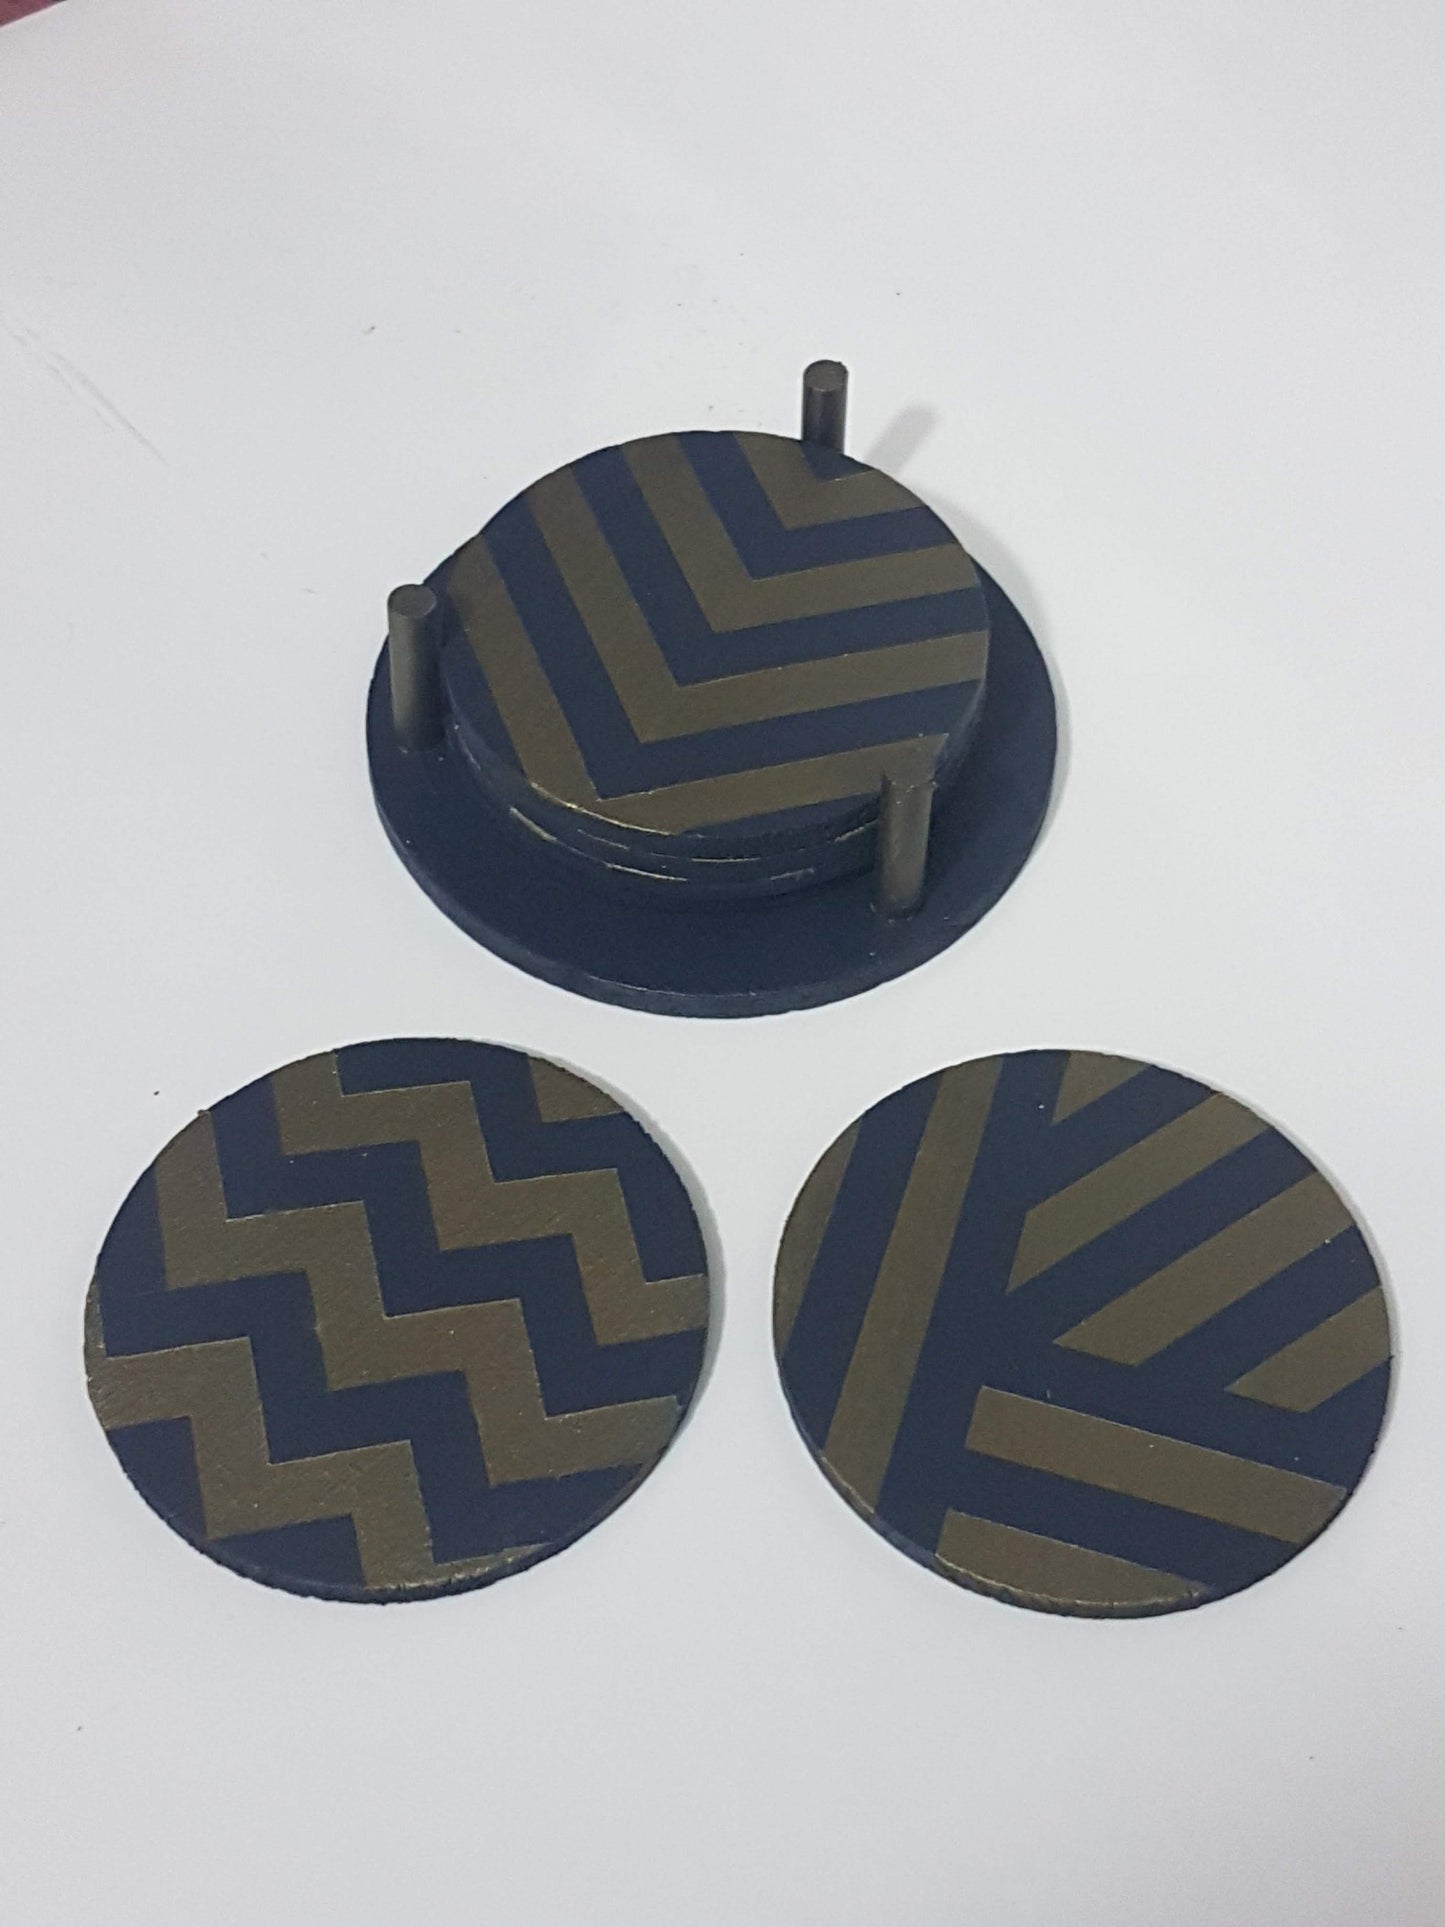 Done up North Geometric Coaster Painting Kit